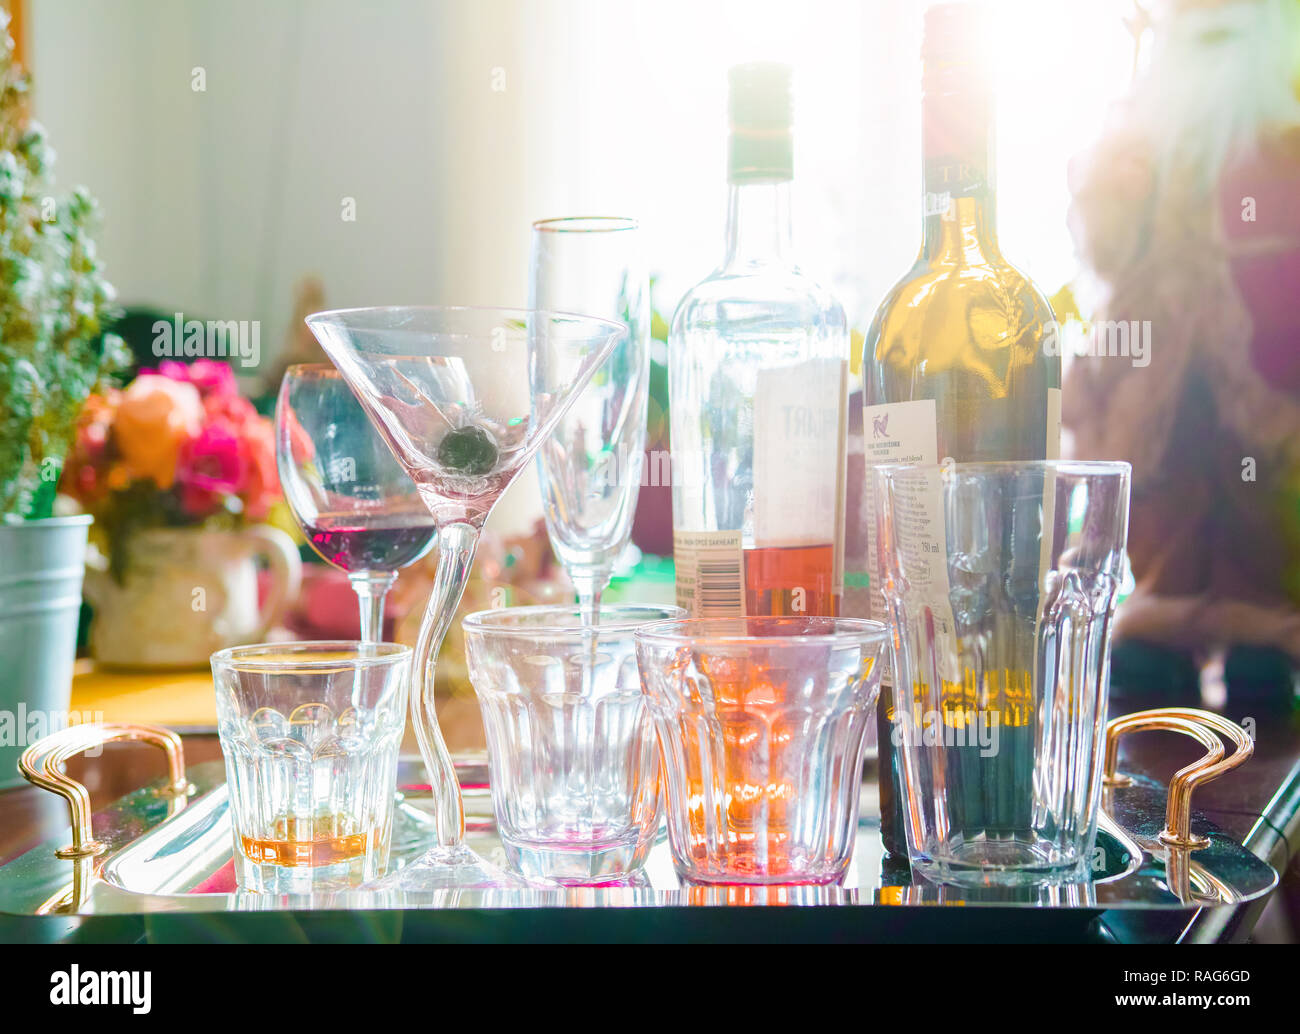 Empty alcohol glasses and two bottles on a tray. Early morning, end of Christmas party. Stock Photo